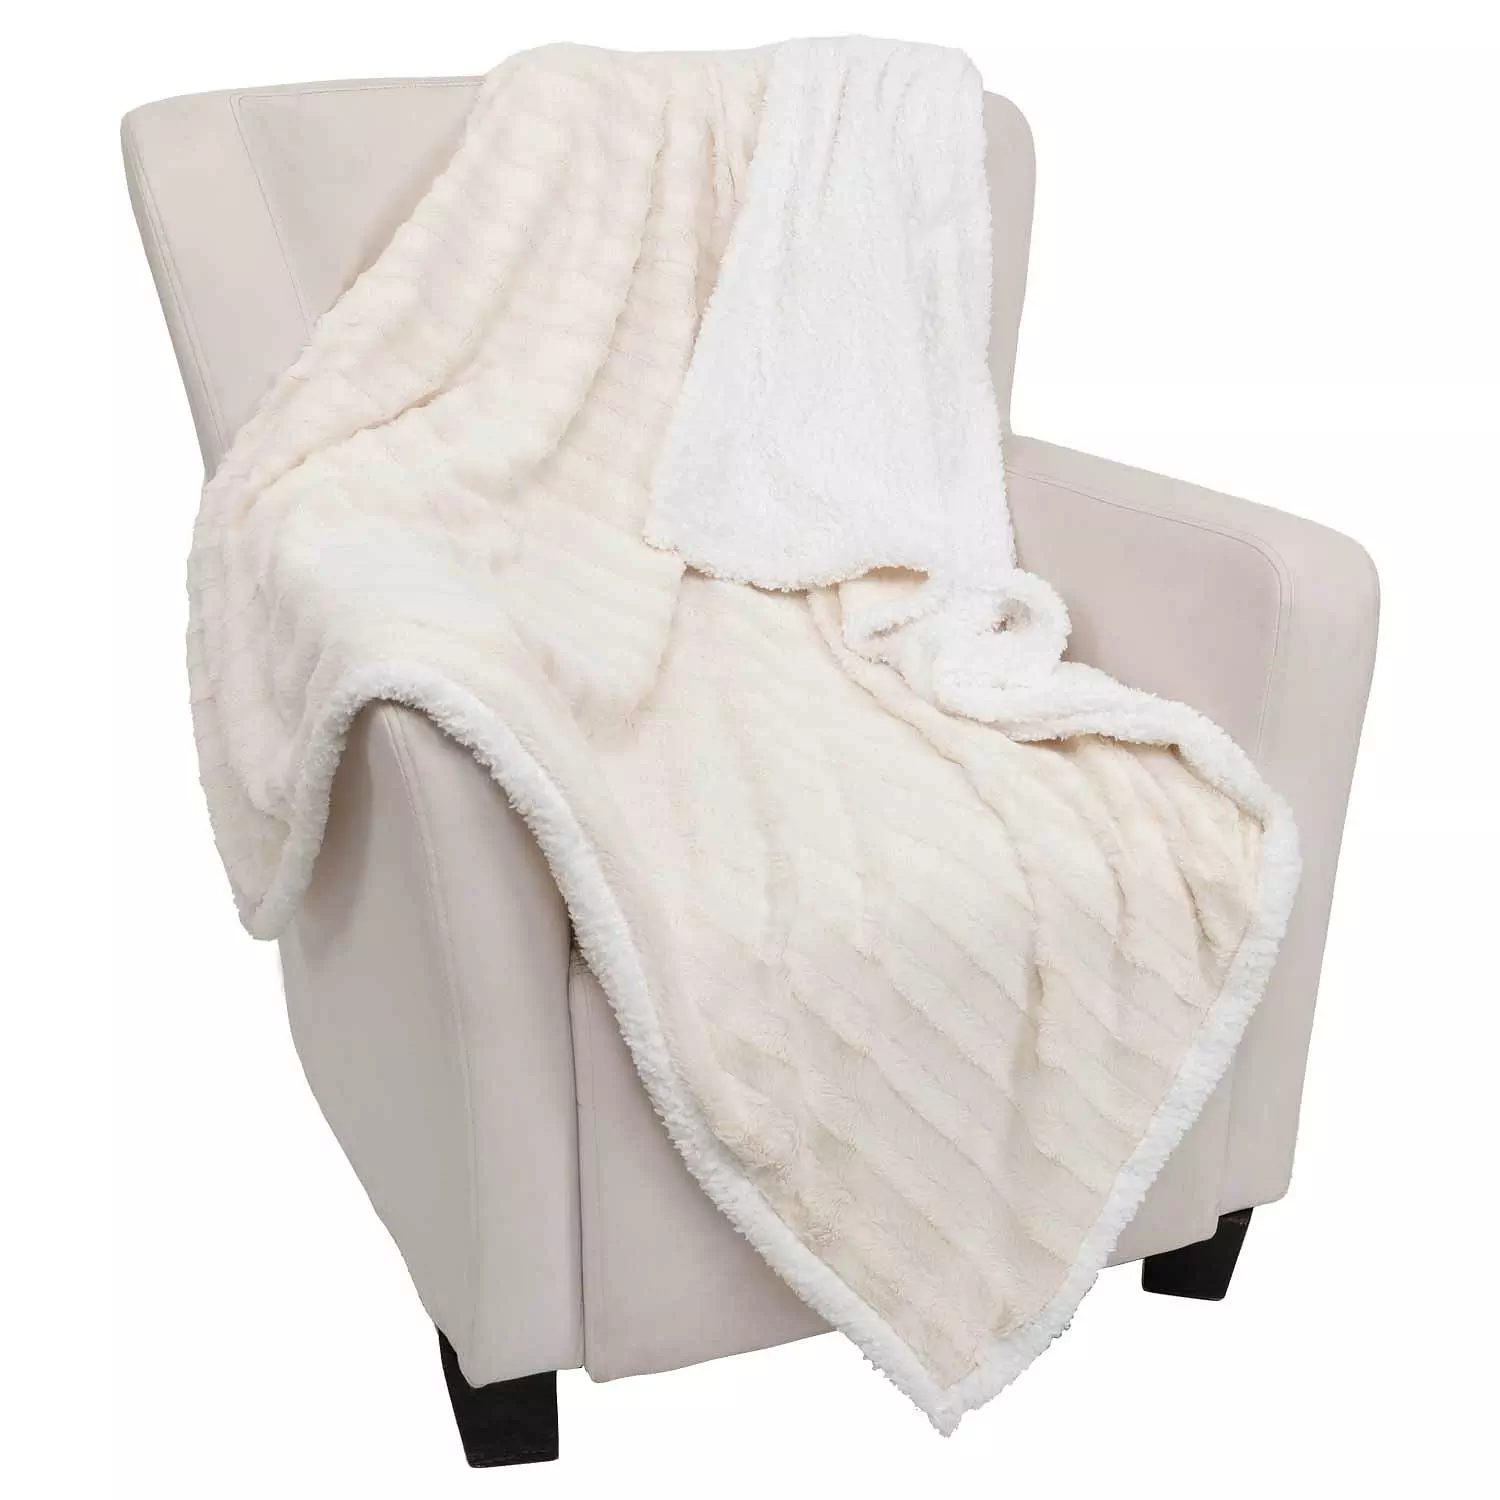 Super soft chevron throw with sherpa backing, 50"x60", ivory